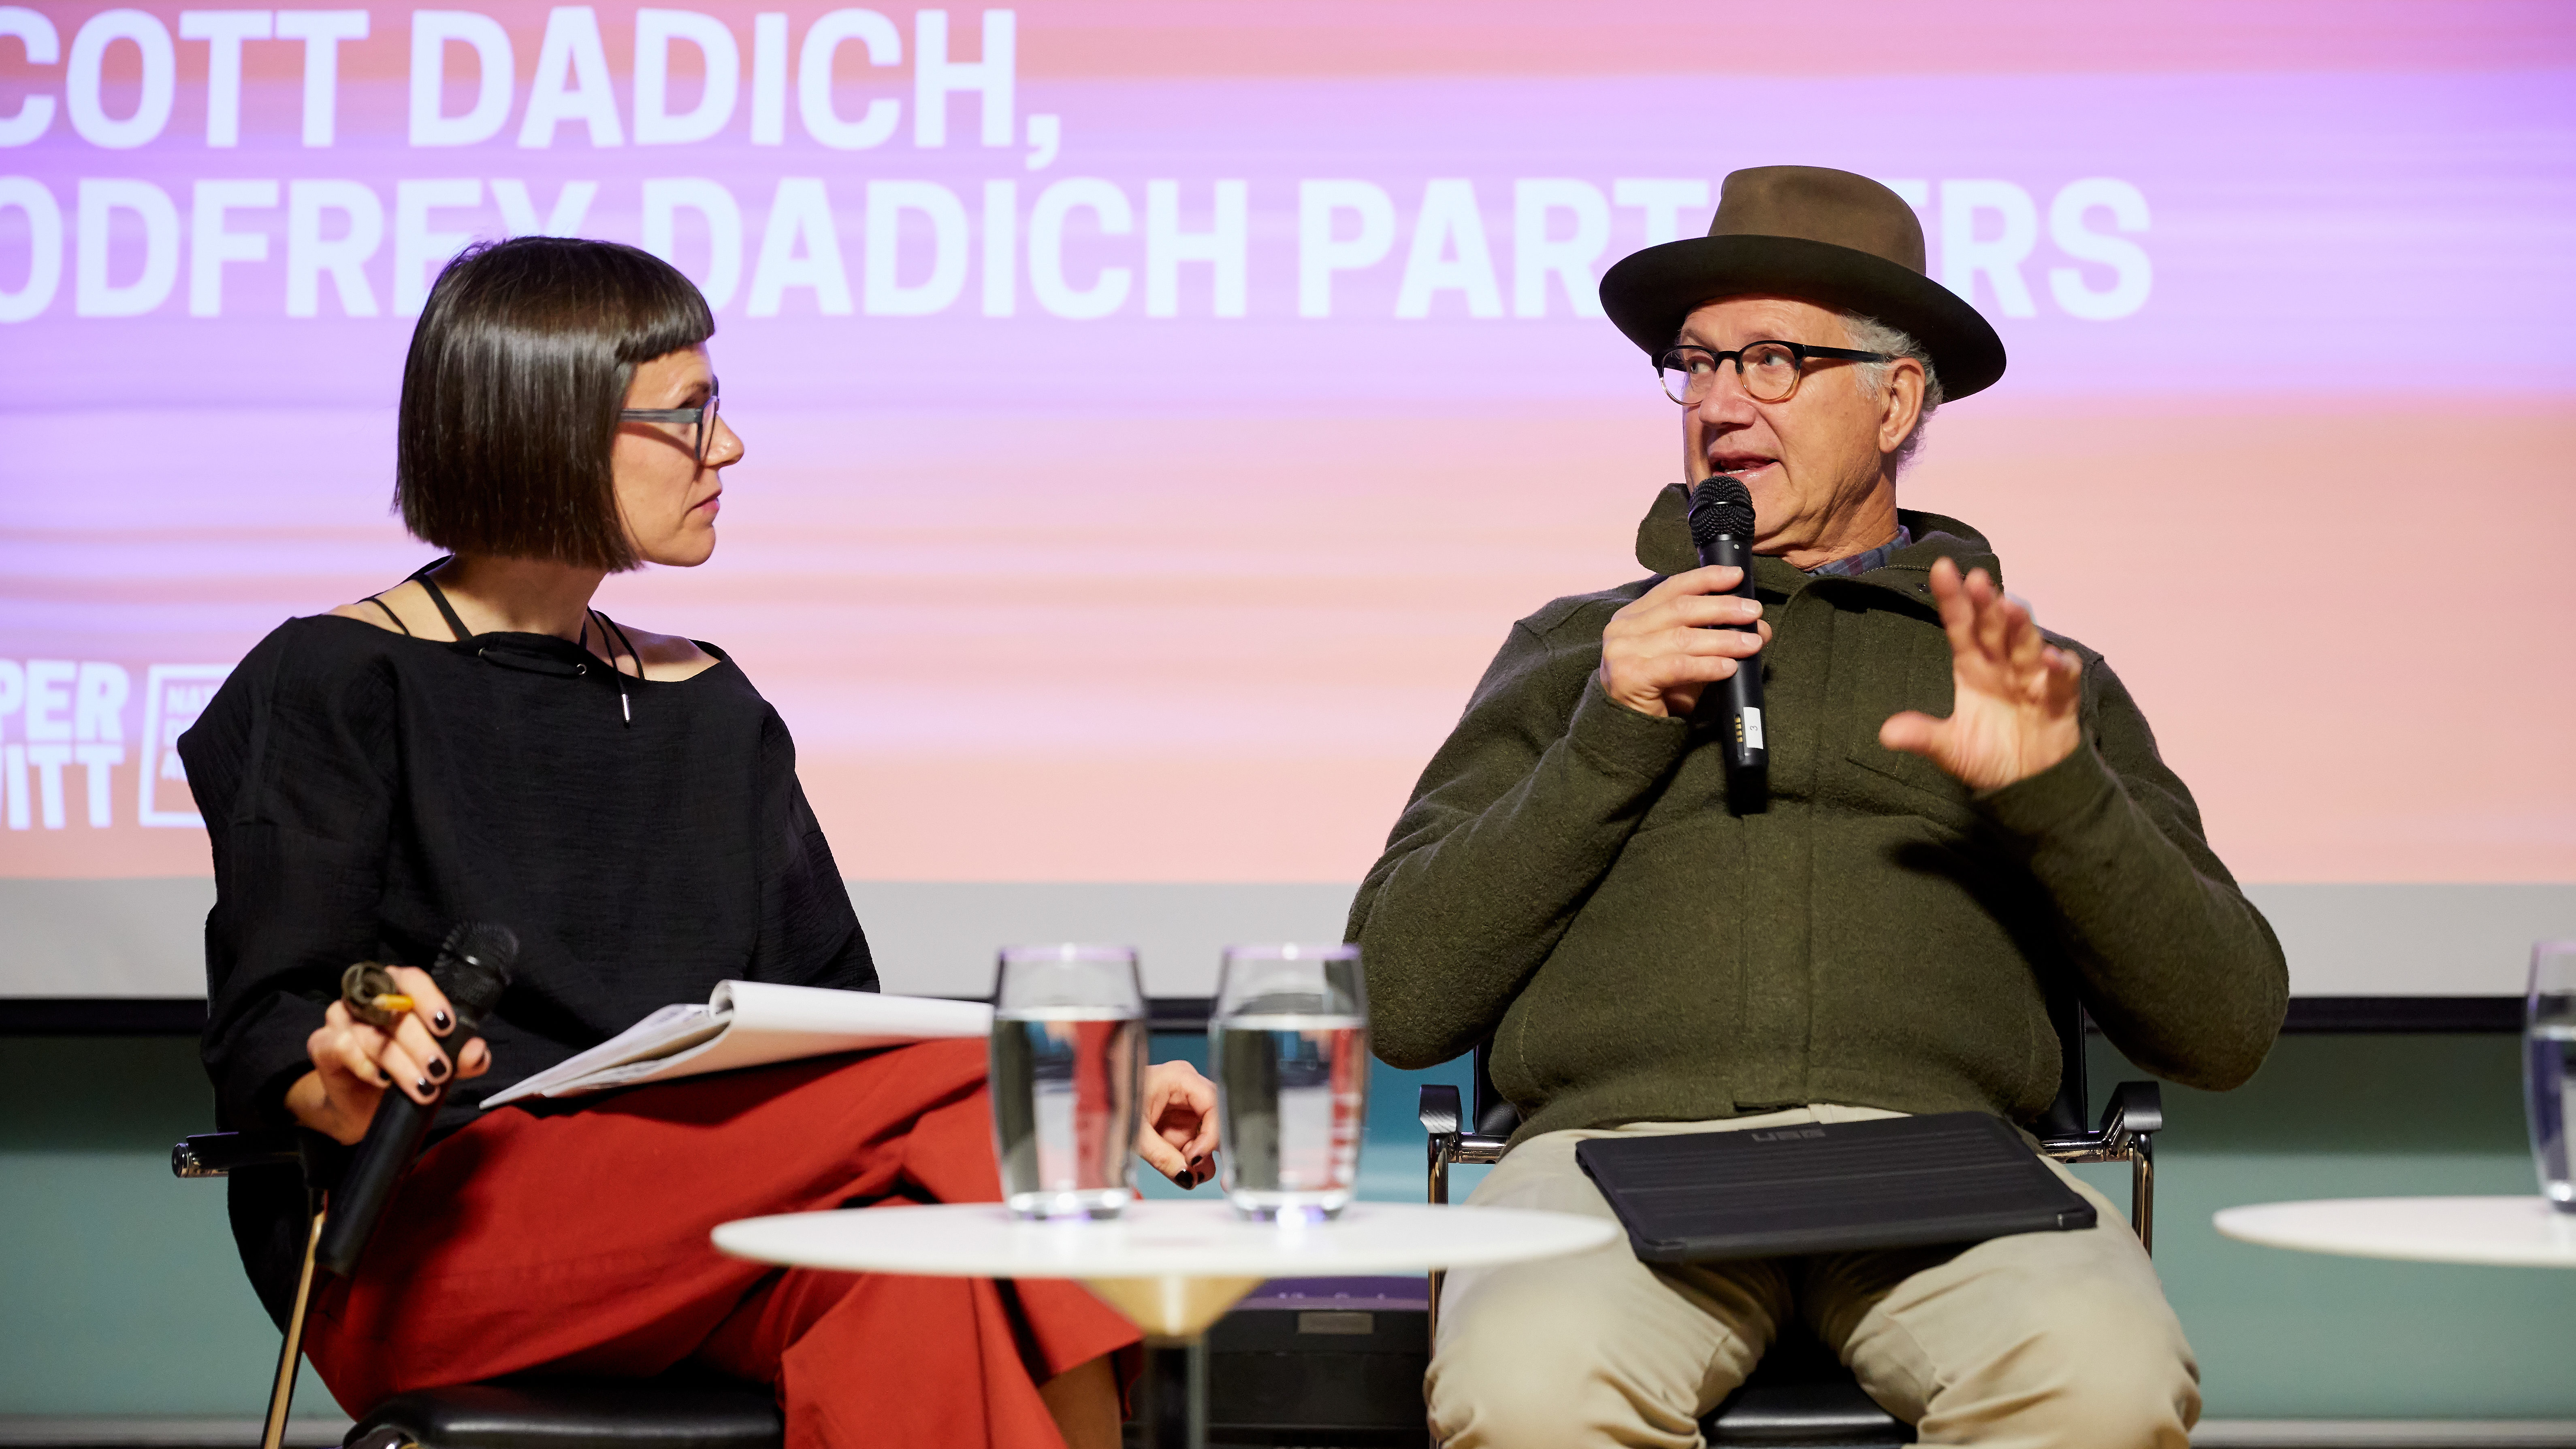 Image of two people on a stage holding microphones. Andrea Lipps has a dark bob haircut and glass, a black shirt and red pants. Tinker Hatfield is on the right, he wears a green woolen jacket and a fedora.